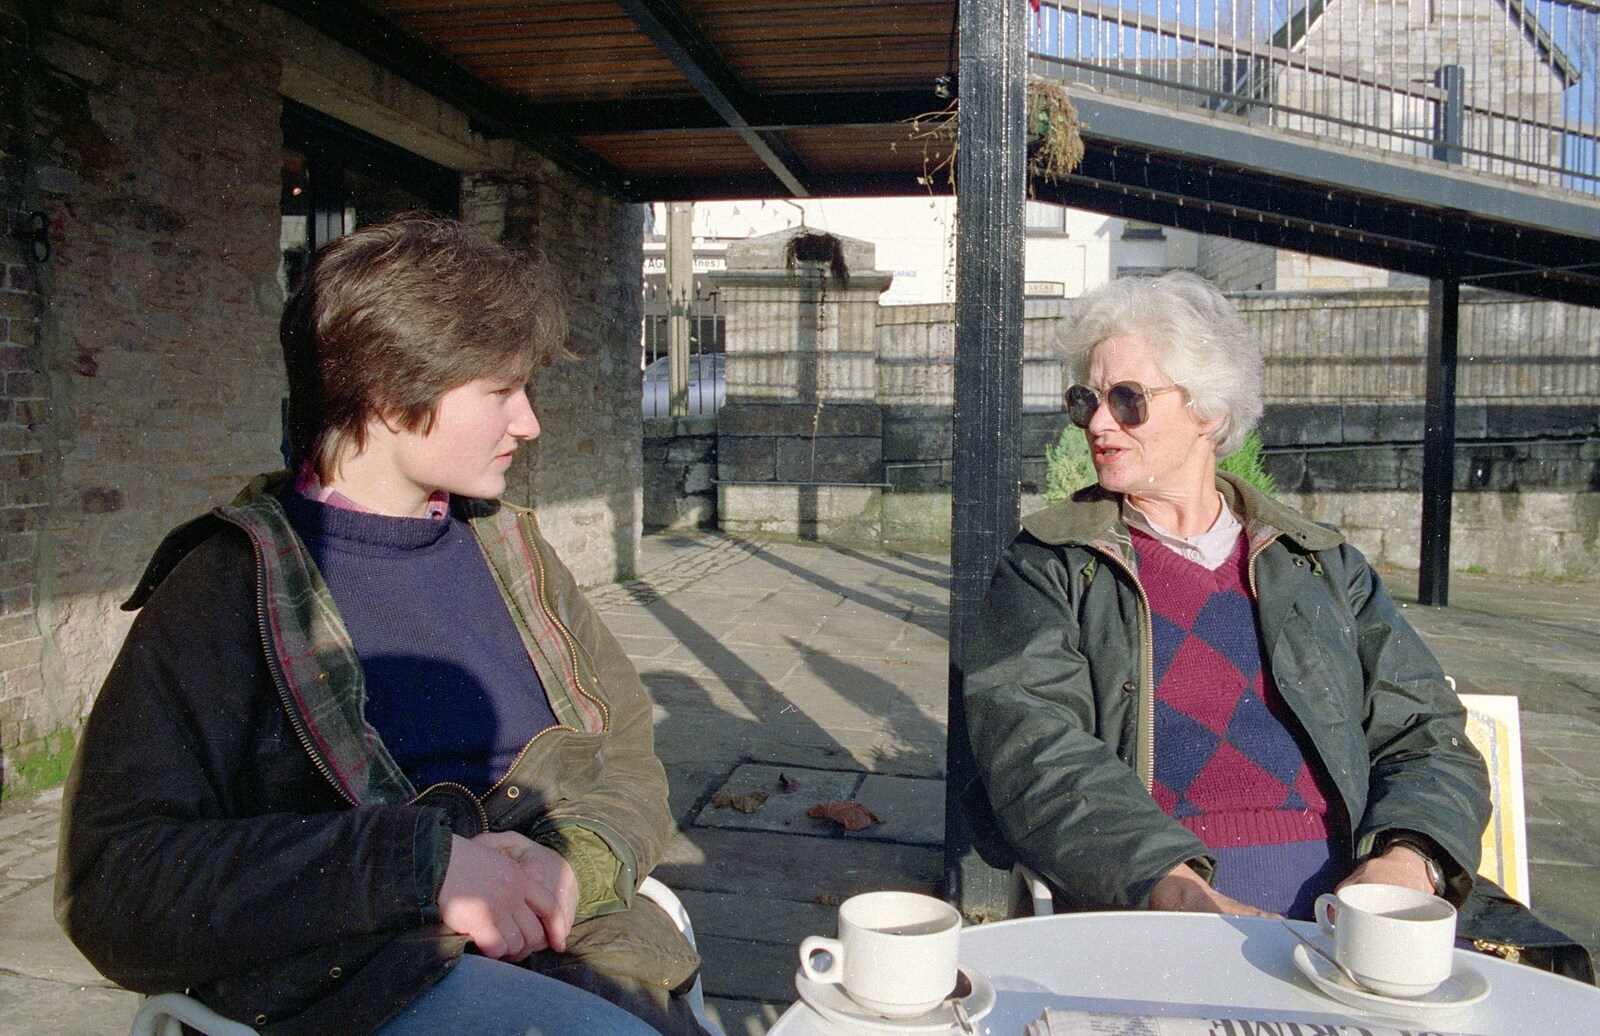 Angela and Diana down by the quay in Totnes from Uni: A Dinner Party, Harbertonford and Buckfastleigh, Devon - 24th December 1988